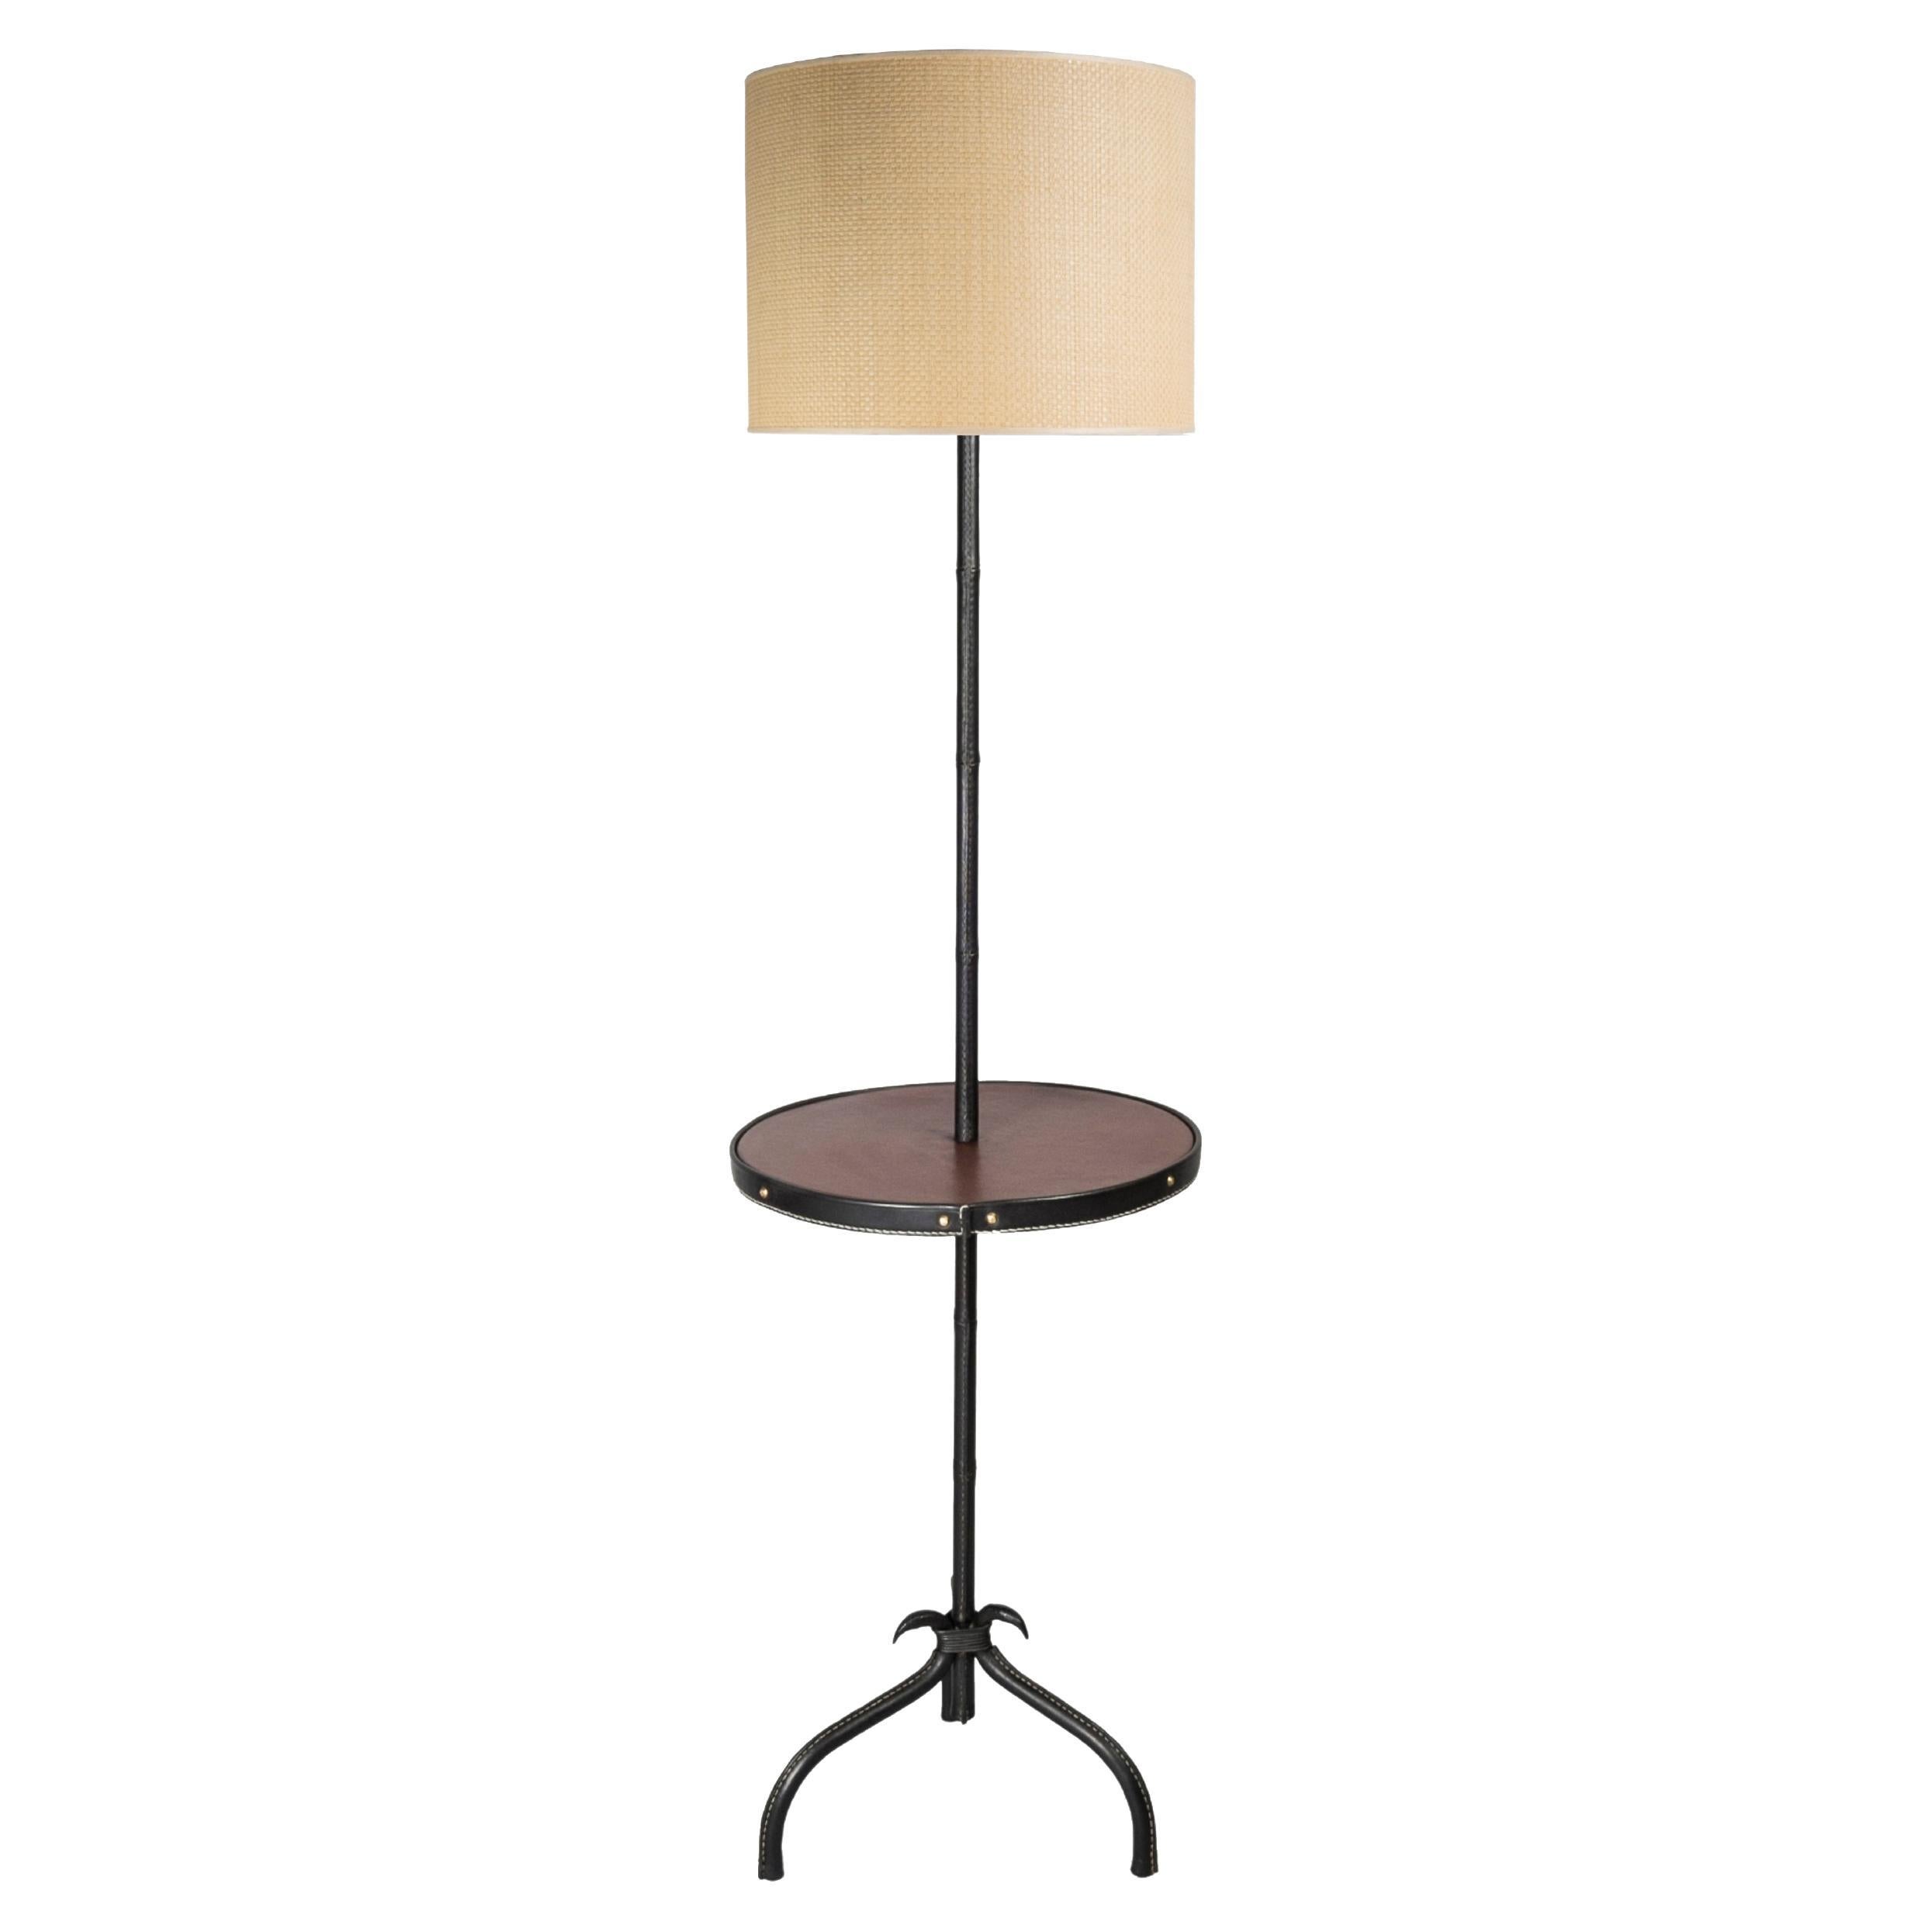 1050's Stitched Leather Floor Lamp by Jacques Adnet